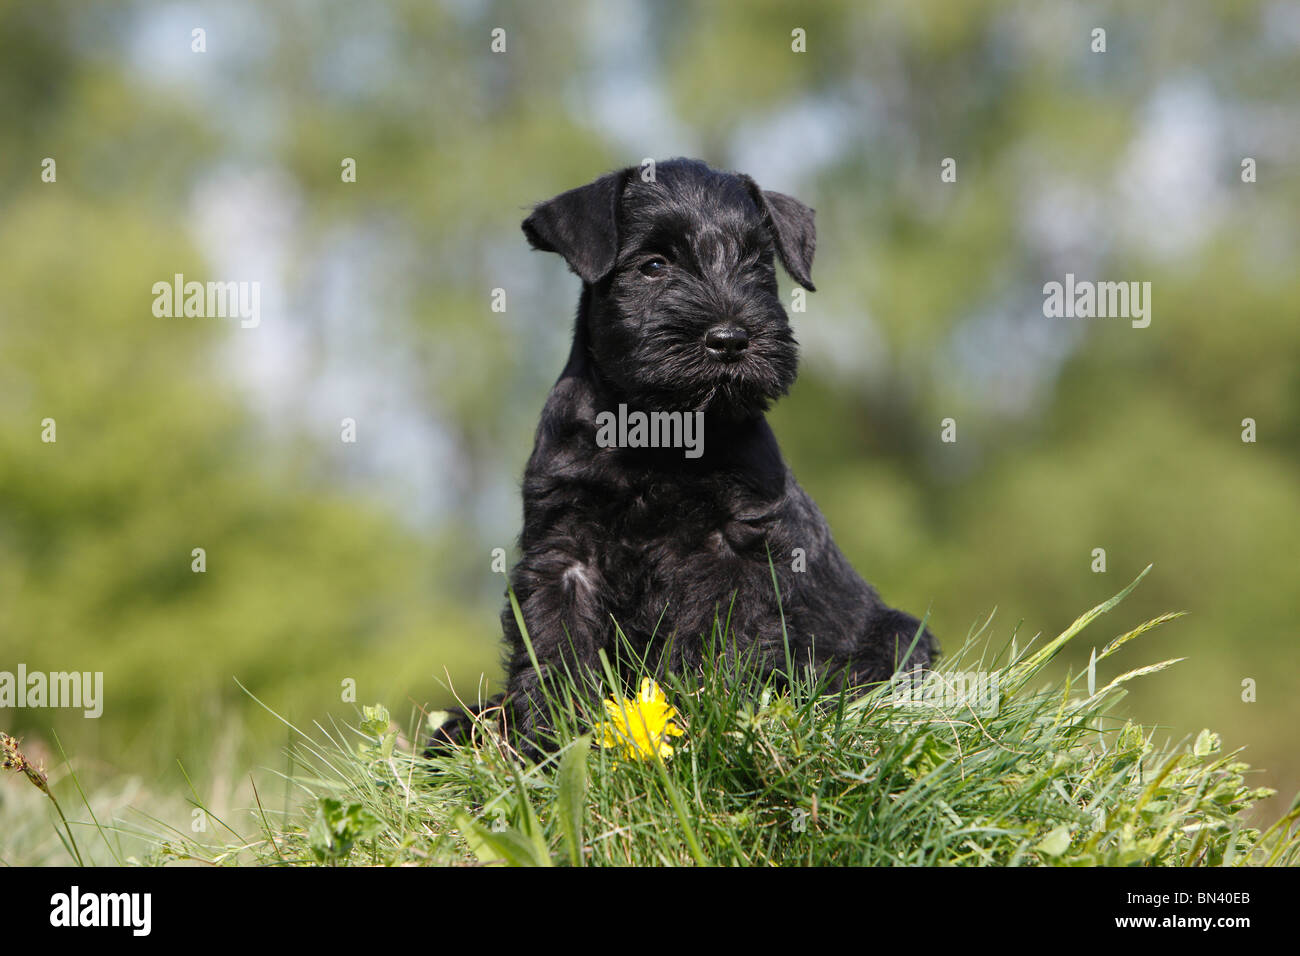 Miniature Schnauzer (Canis lupus f. familiaris), puppy sitting in gras, Germany Stock Photo